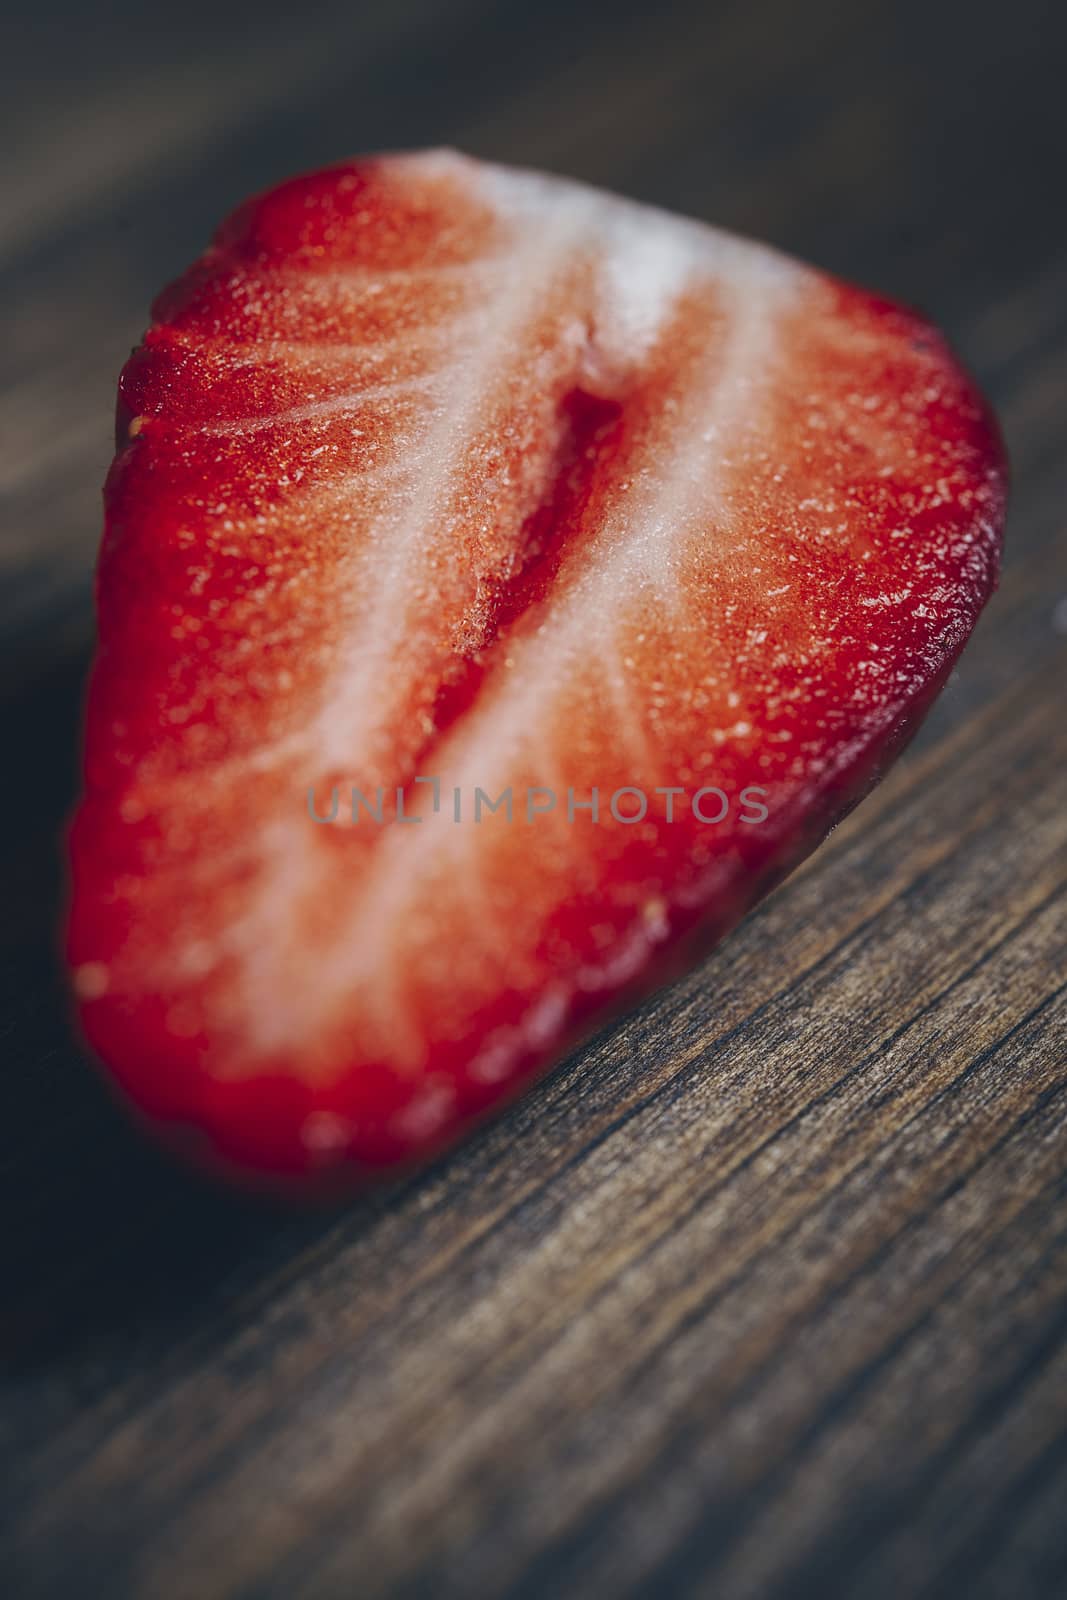 vertical photo of a half strawberry on a wooden background in rustic style